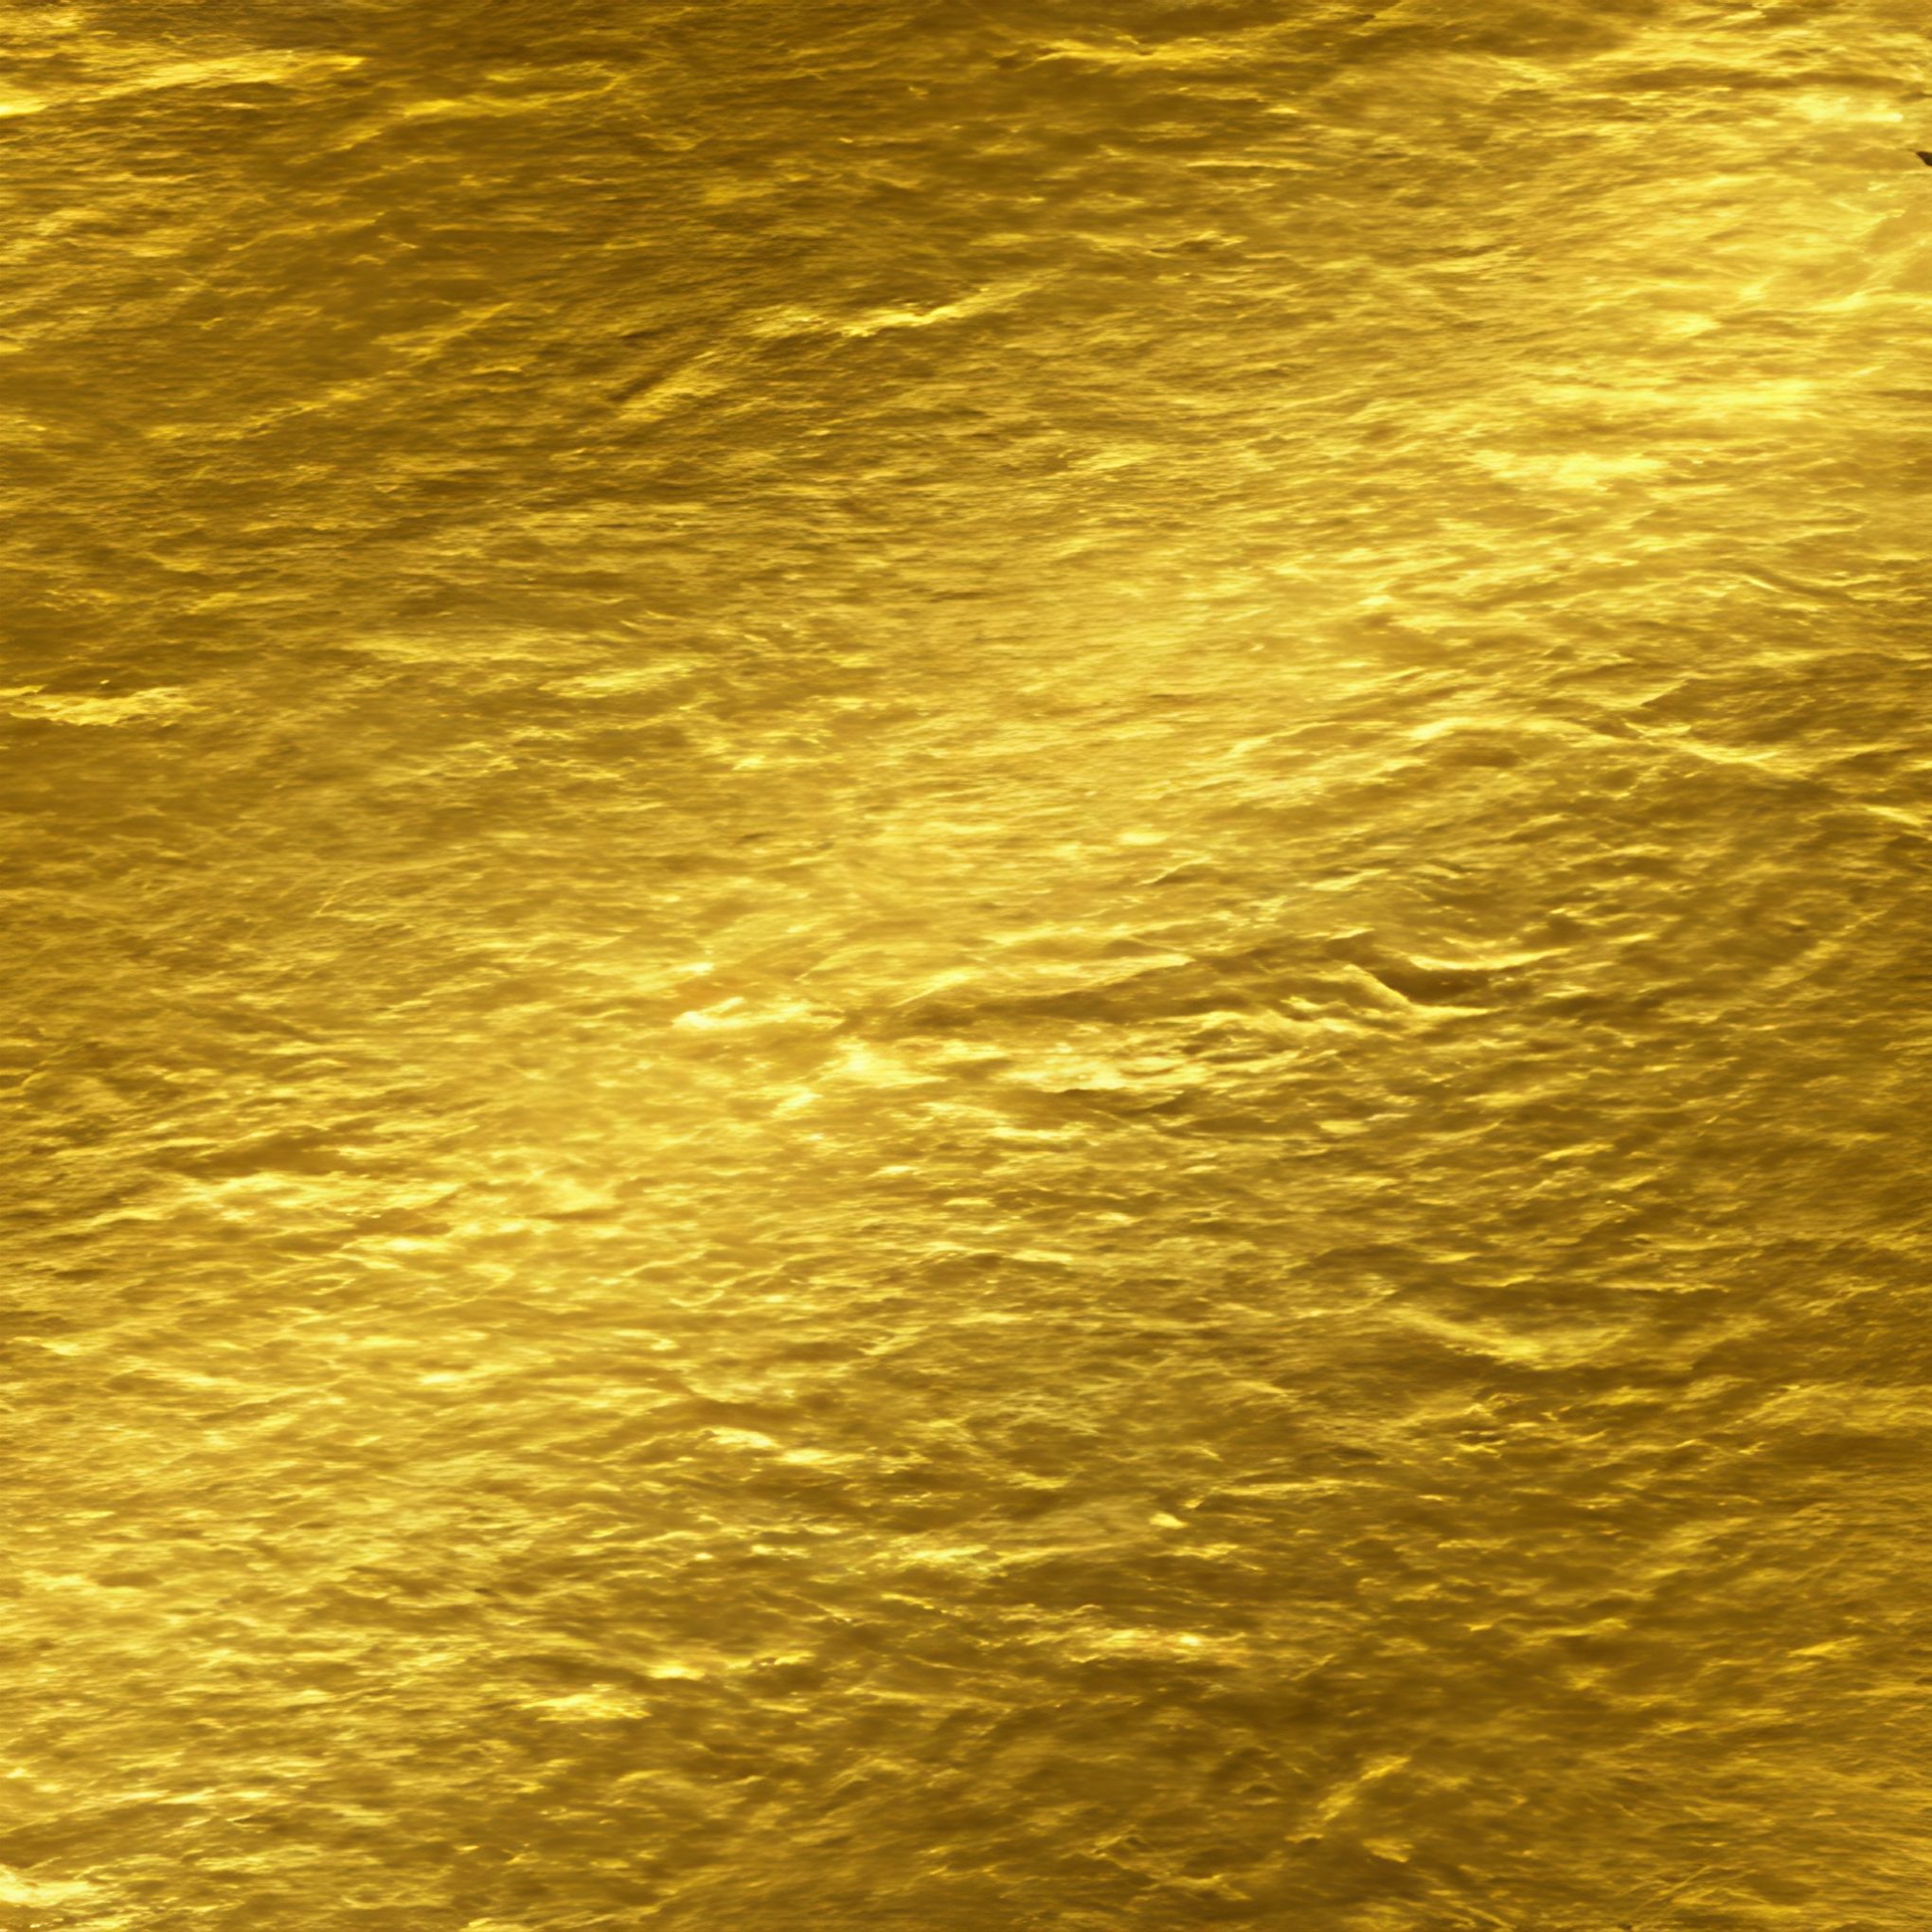 Shiny Gold Foil Background Texture Free Stock Image Download